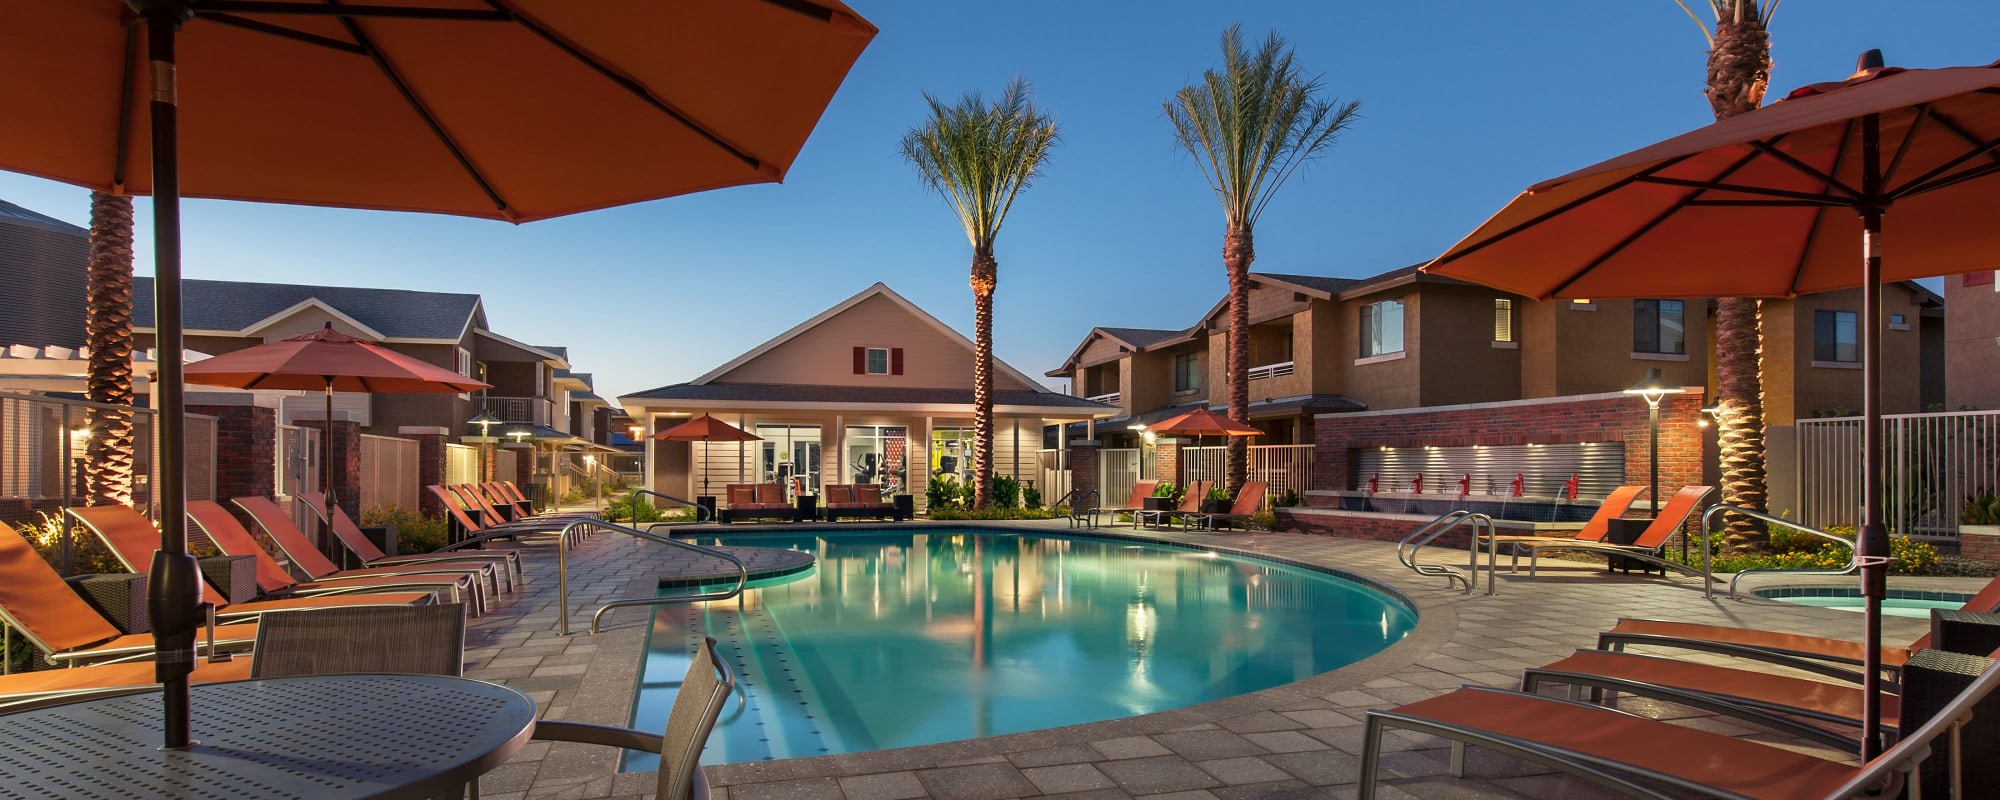 Schedule a tour of Highland Groves at Morrison Ranch Apartments in Gilbert, Arizona